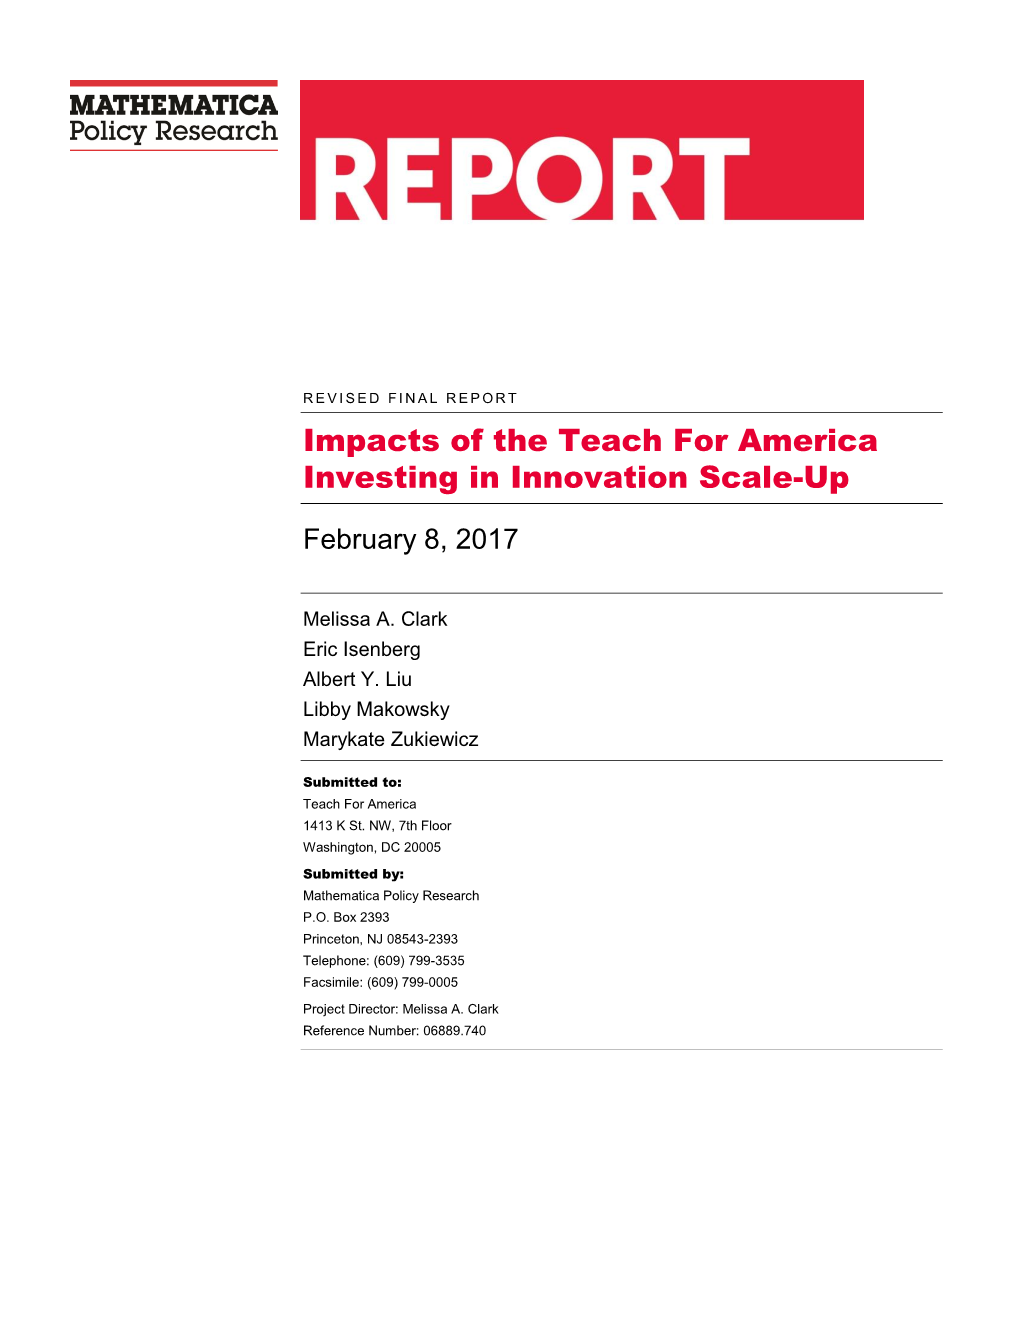 Impacts of the Teach for America Investing in Innovation Scale-Up